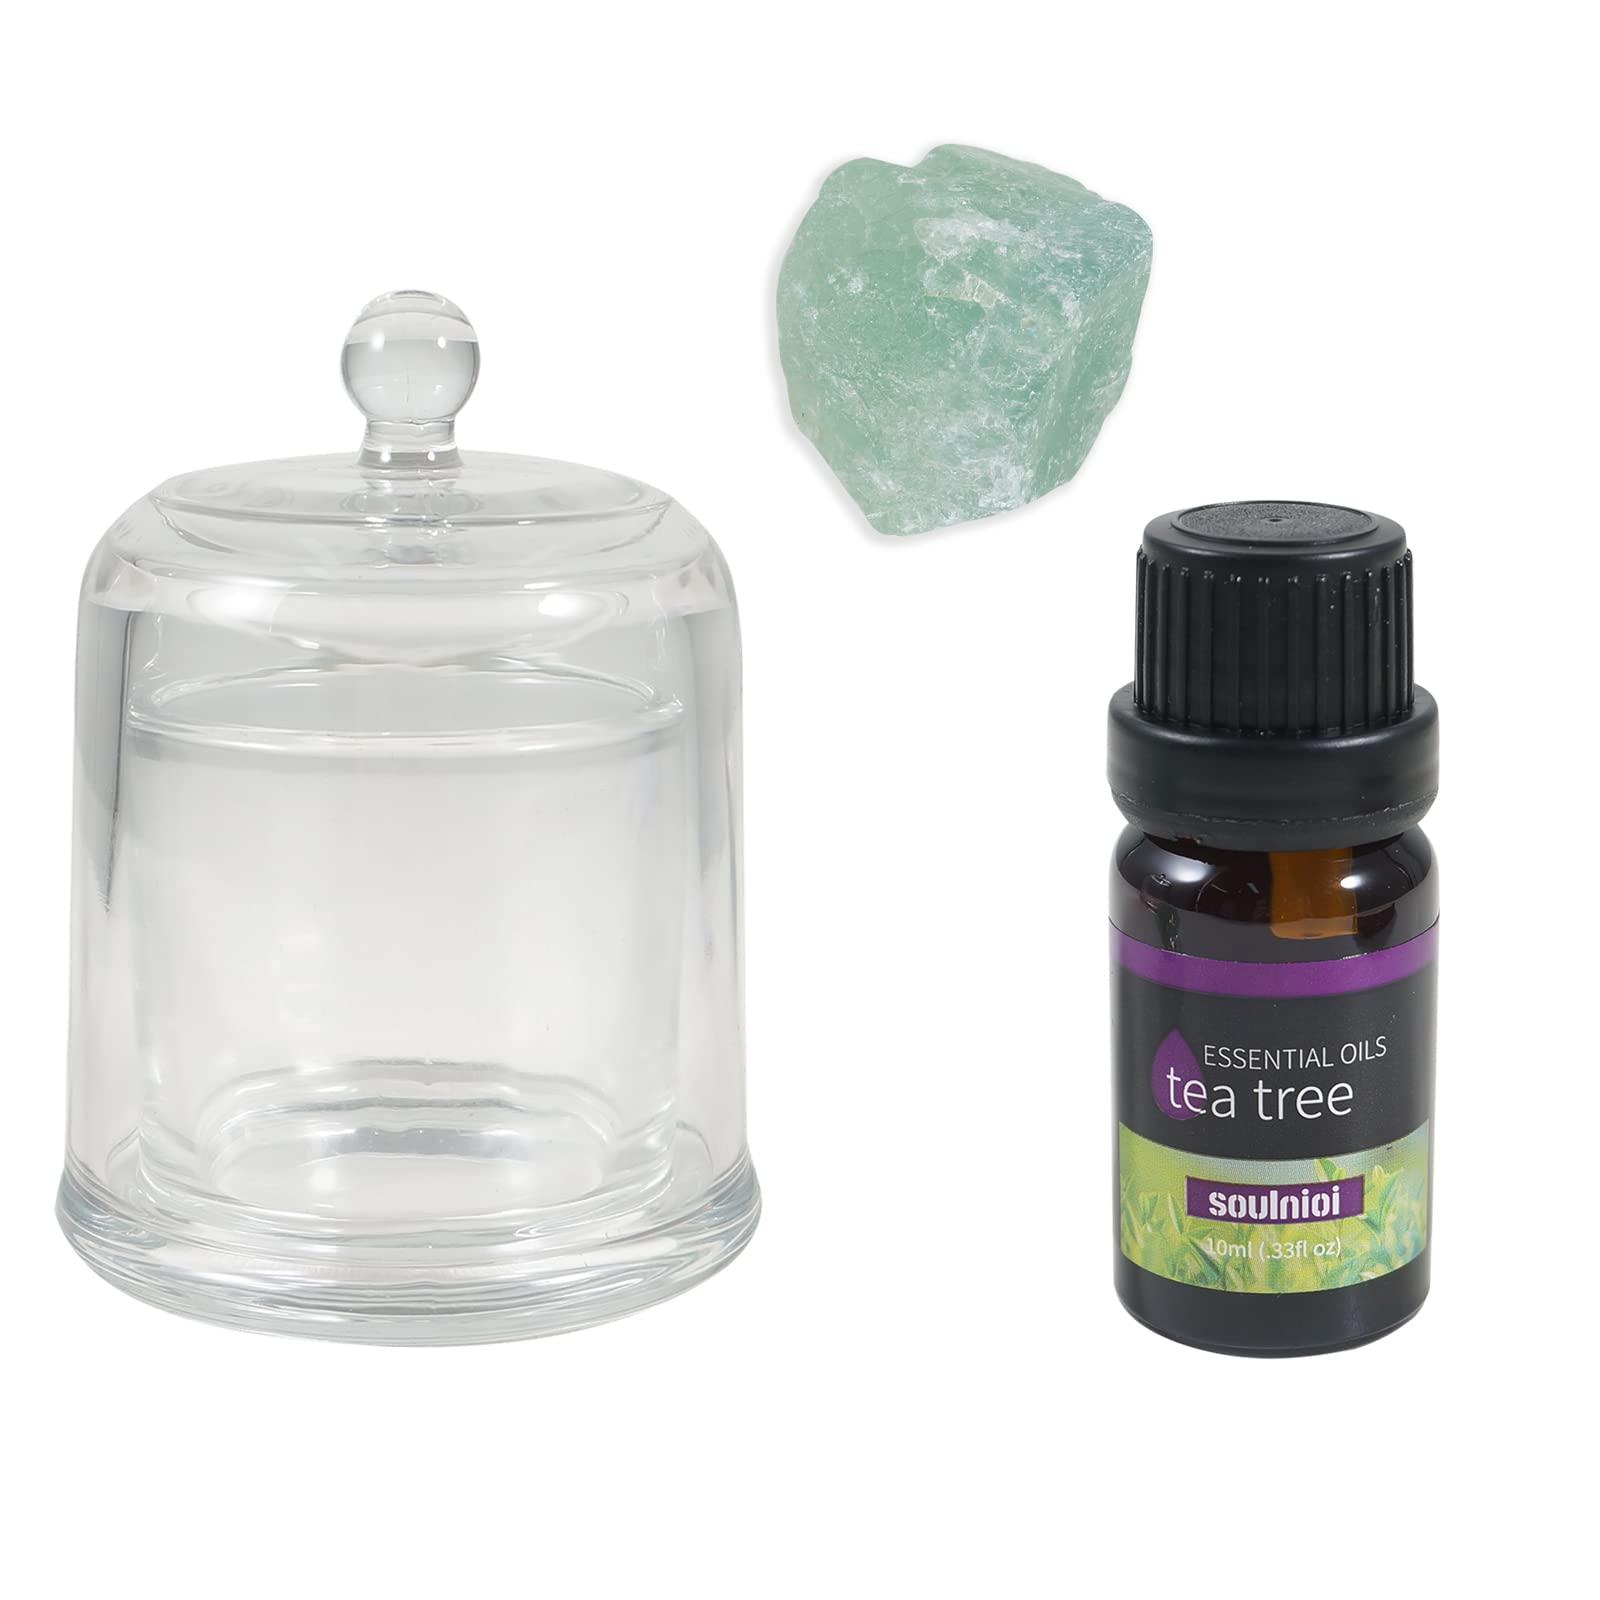 Soulnioi Natural Crystal Green Fluorite Crystal Diffuser Stone for Decoration(1pc), 1pc Tea Tree Essential Oil Diffuser and 1pc Bell Jar Glass Display Dome Jar Cover for Candle